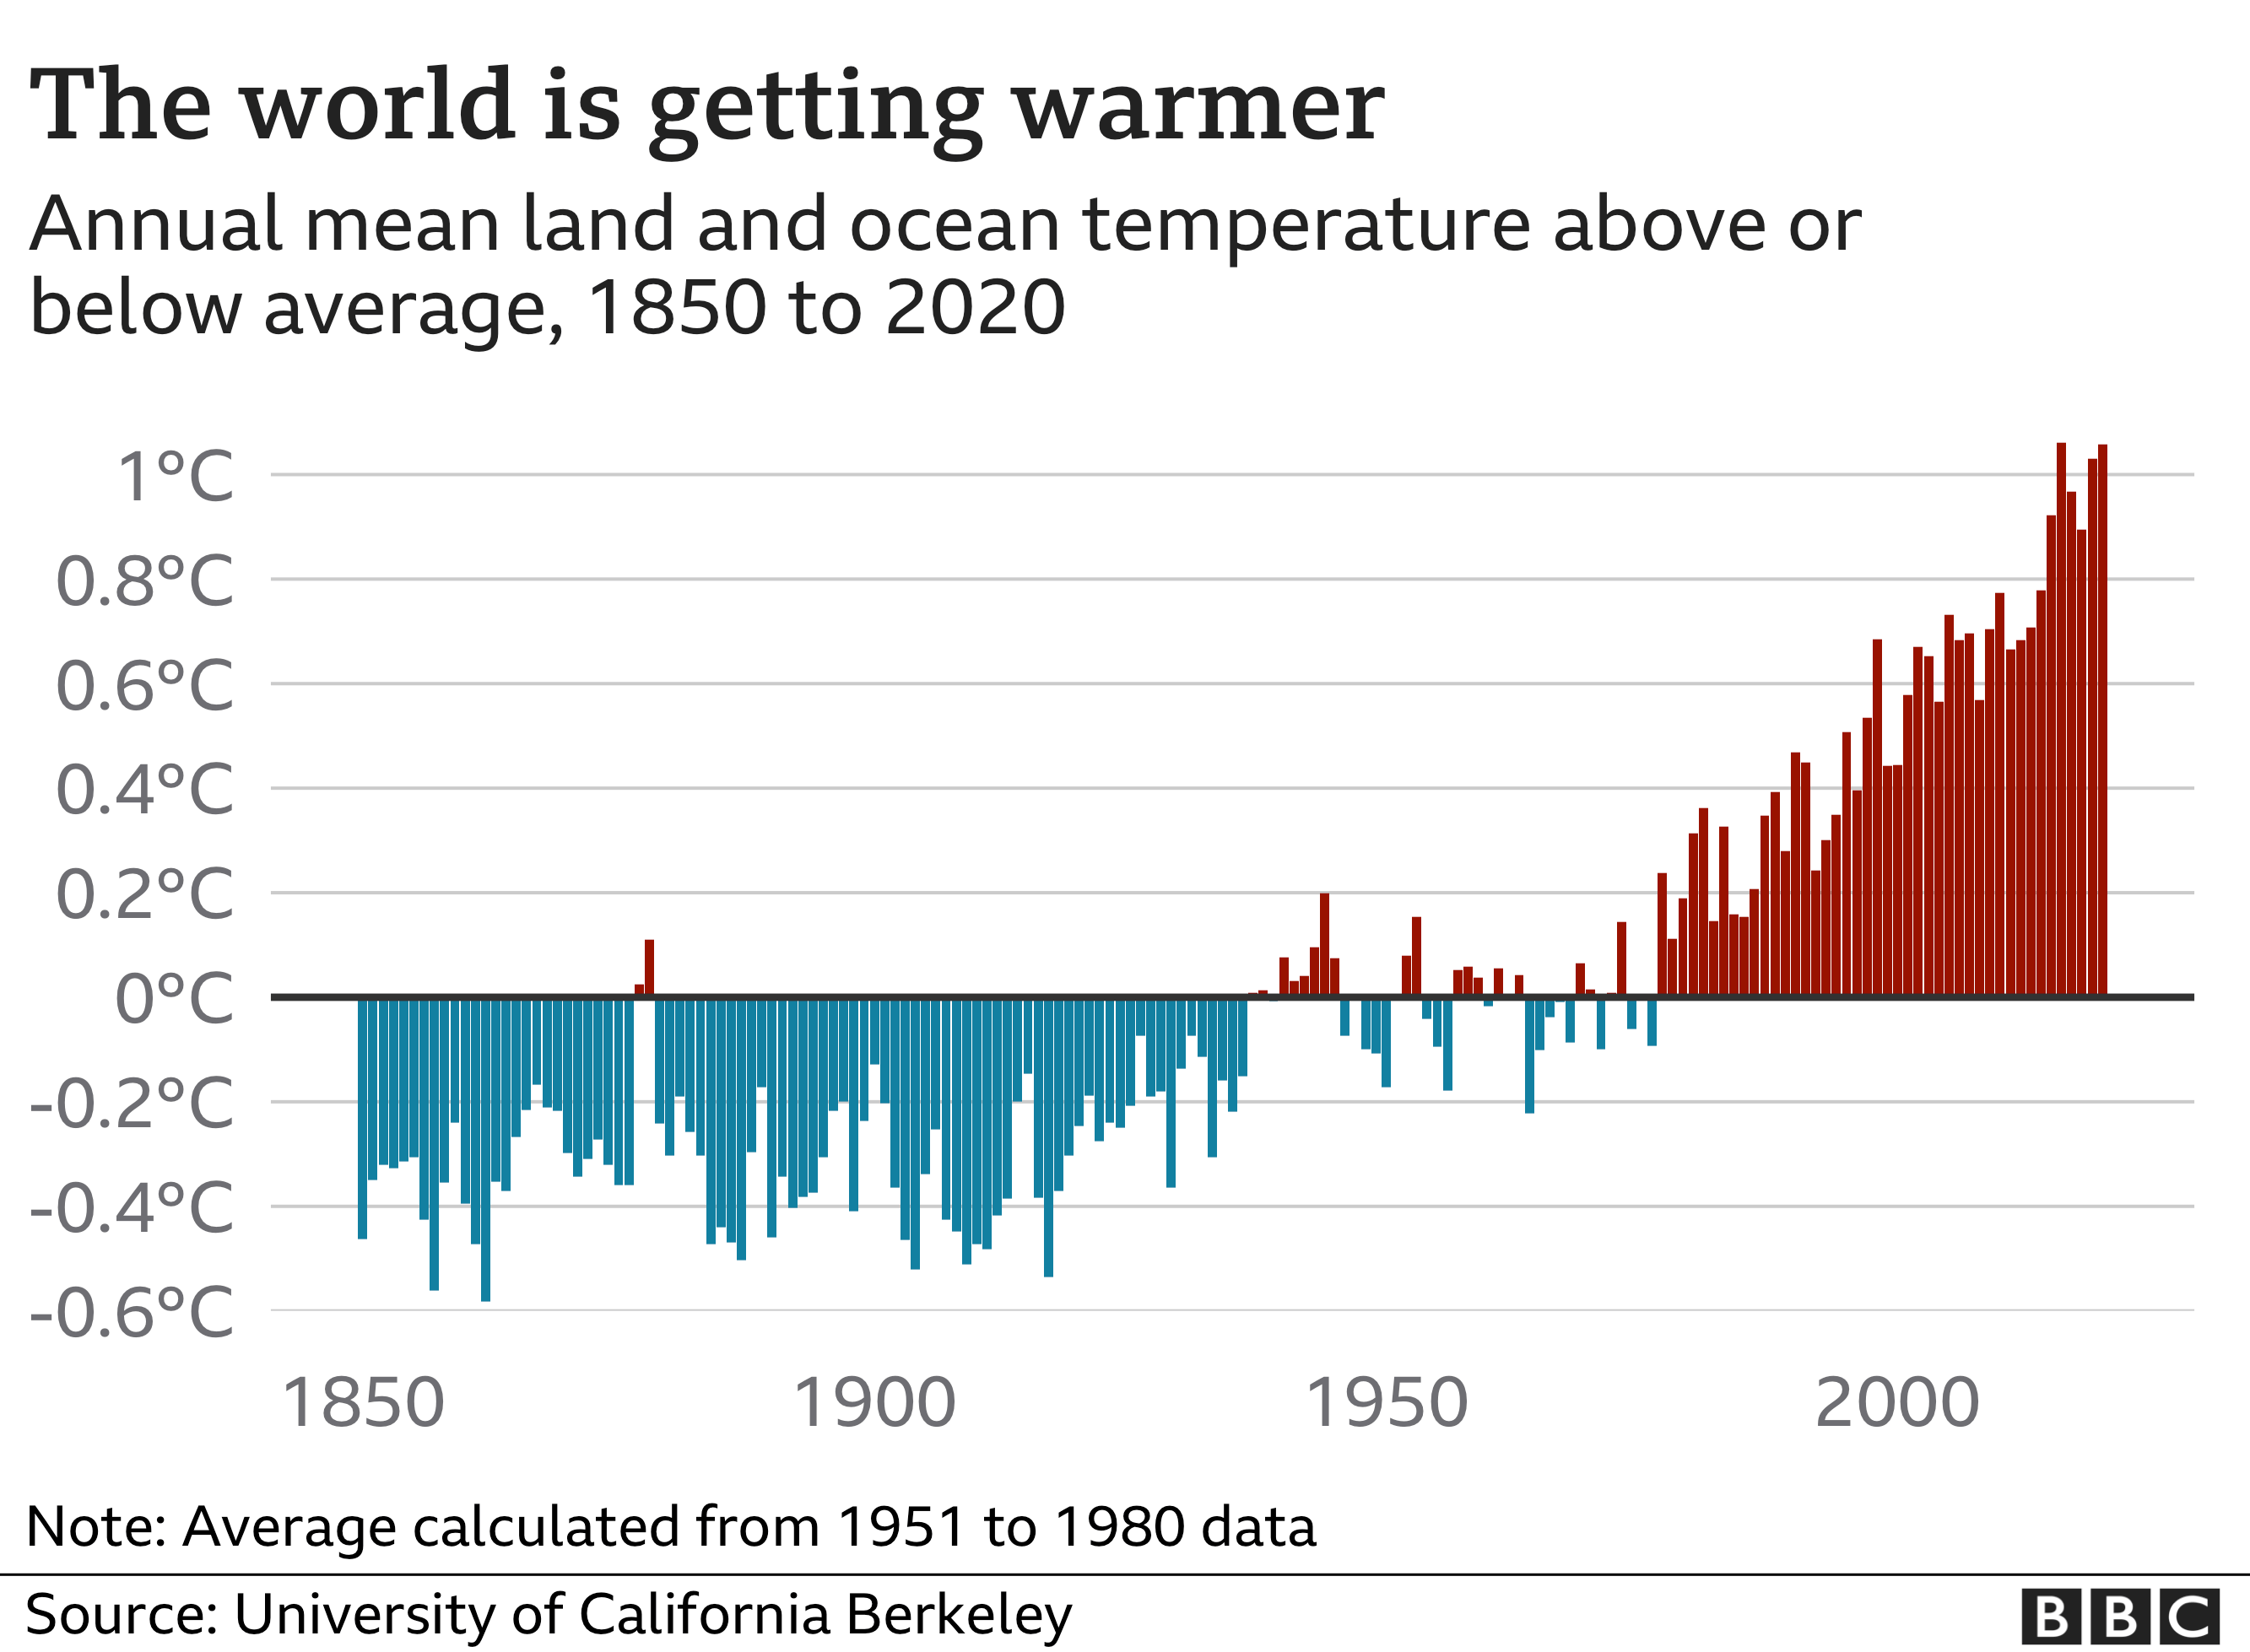 Bar chart showing how the world has been getting warmer between 1850 to 2020